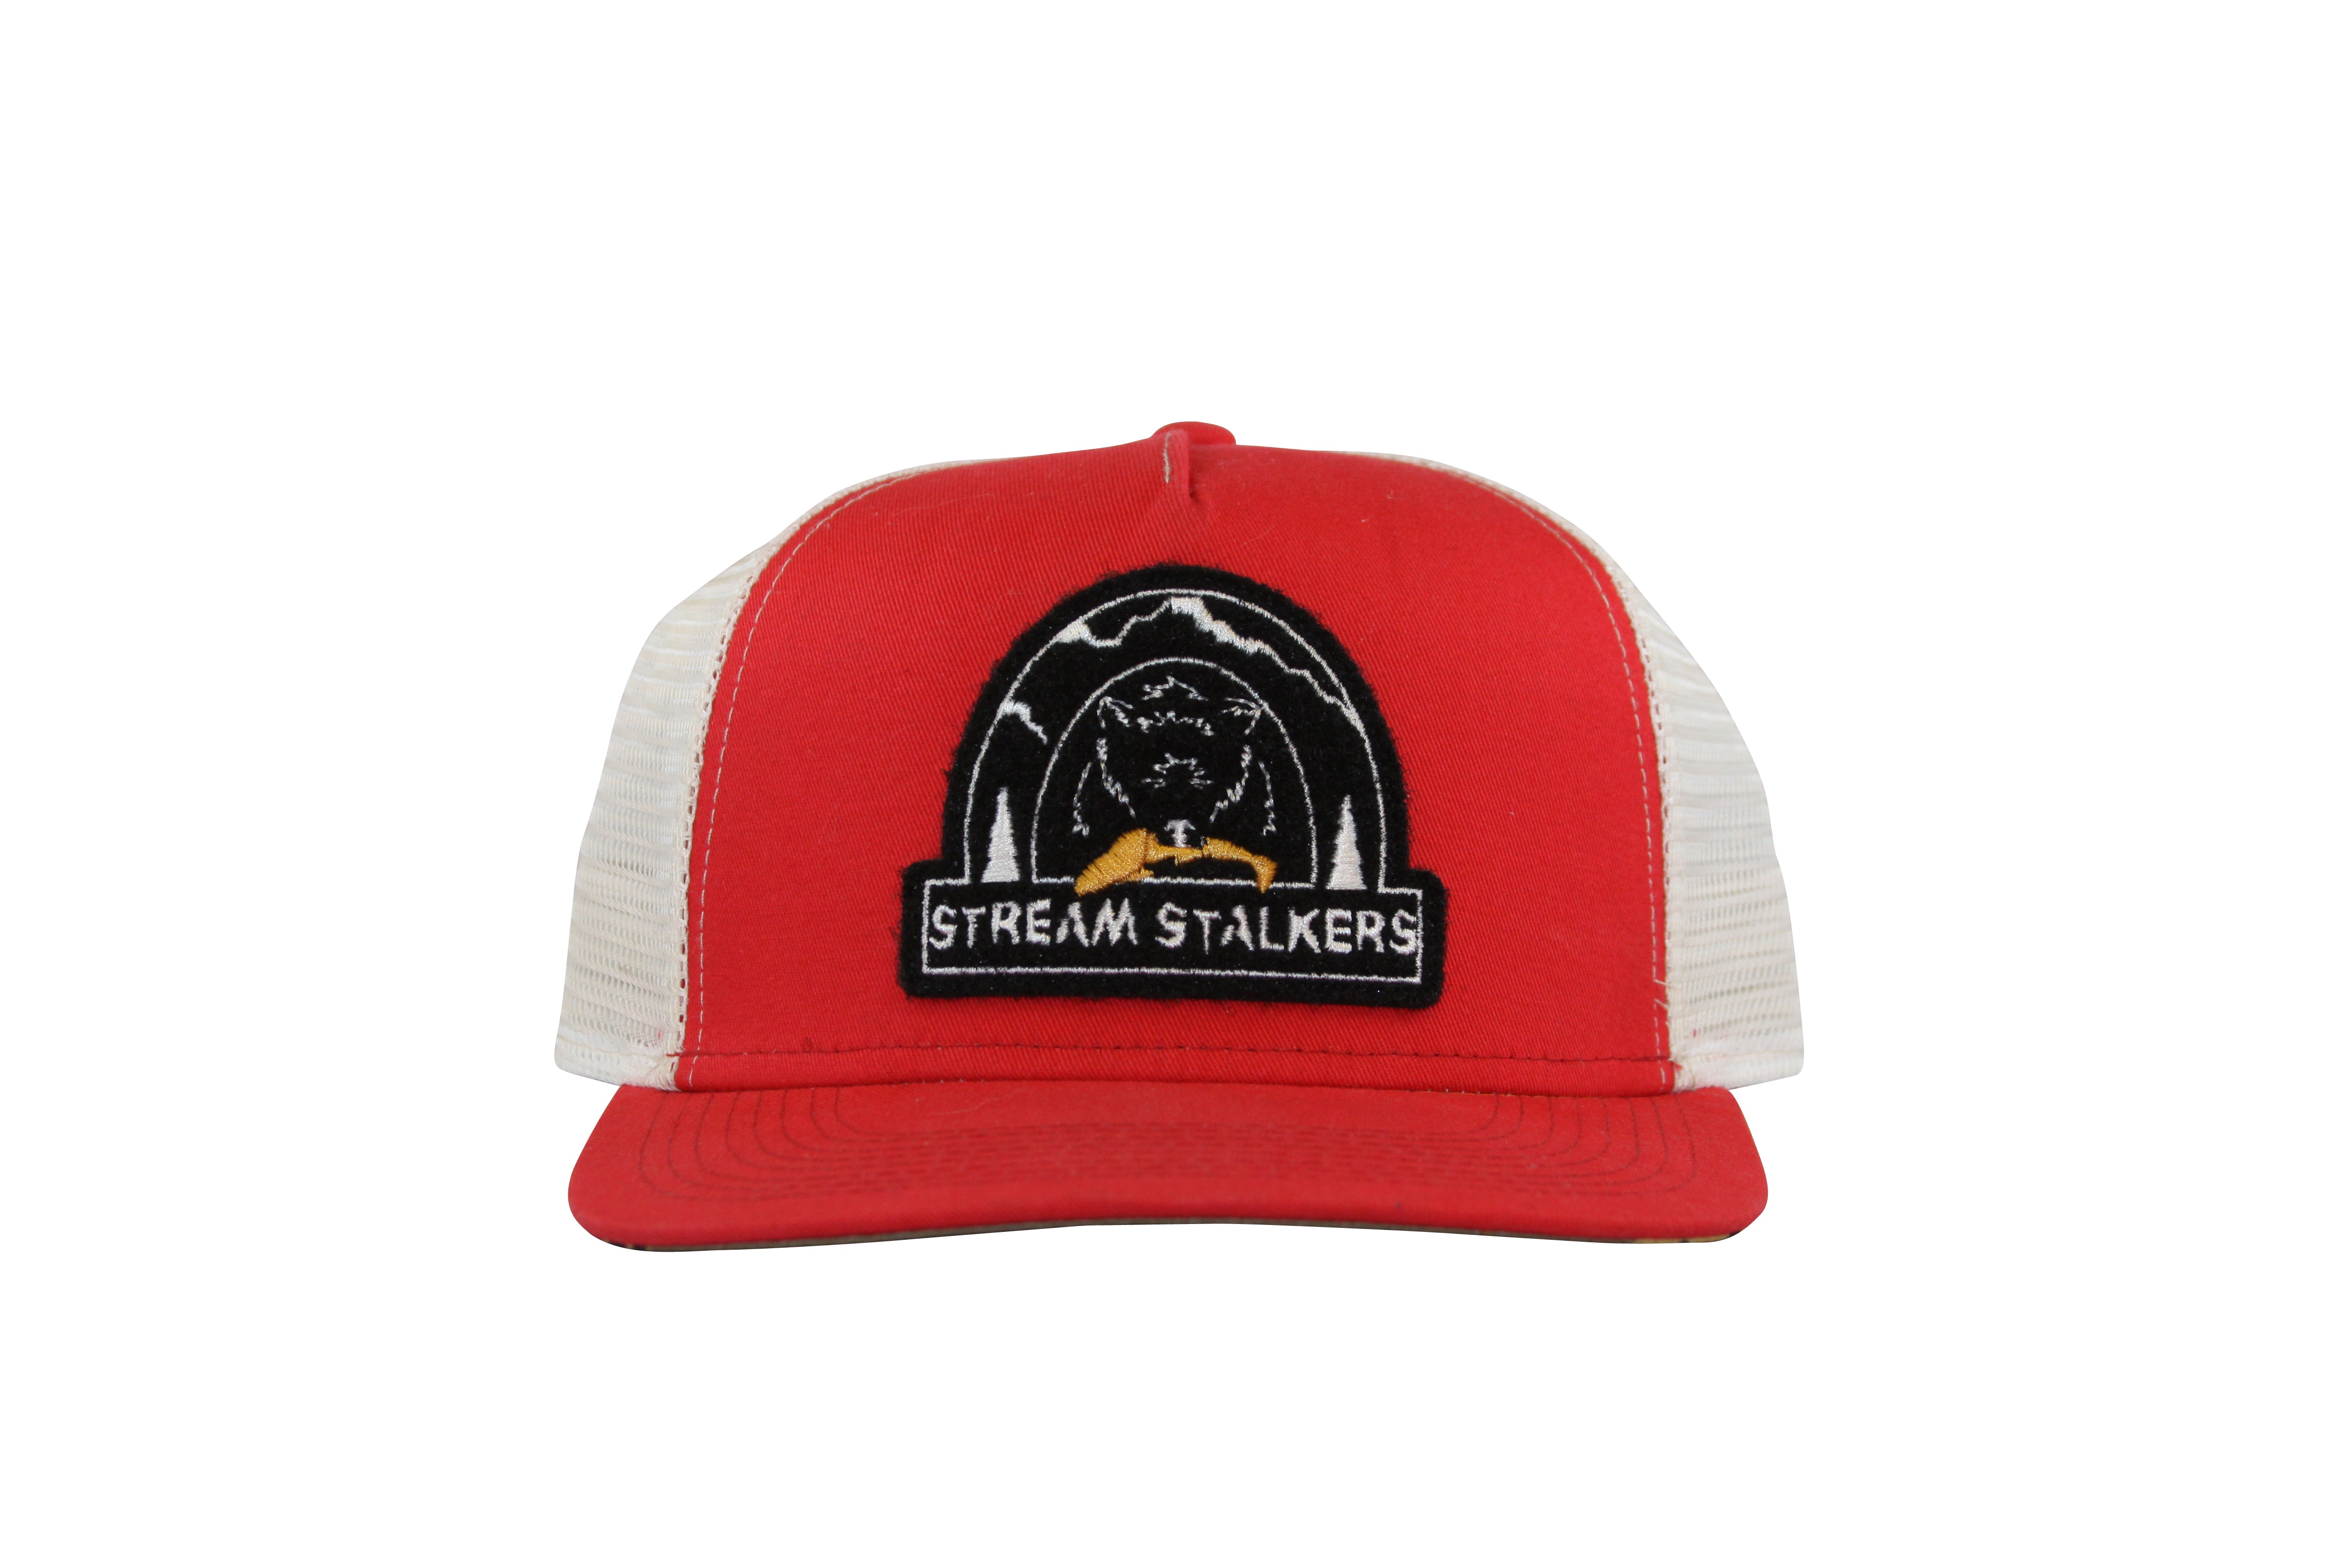 Golden Trout Hat - Red